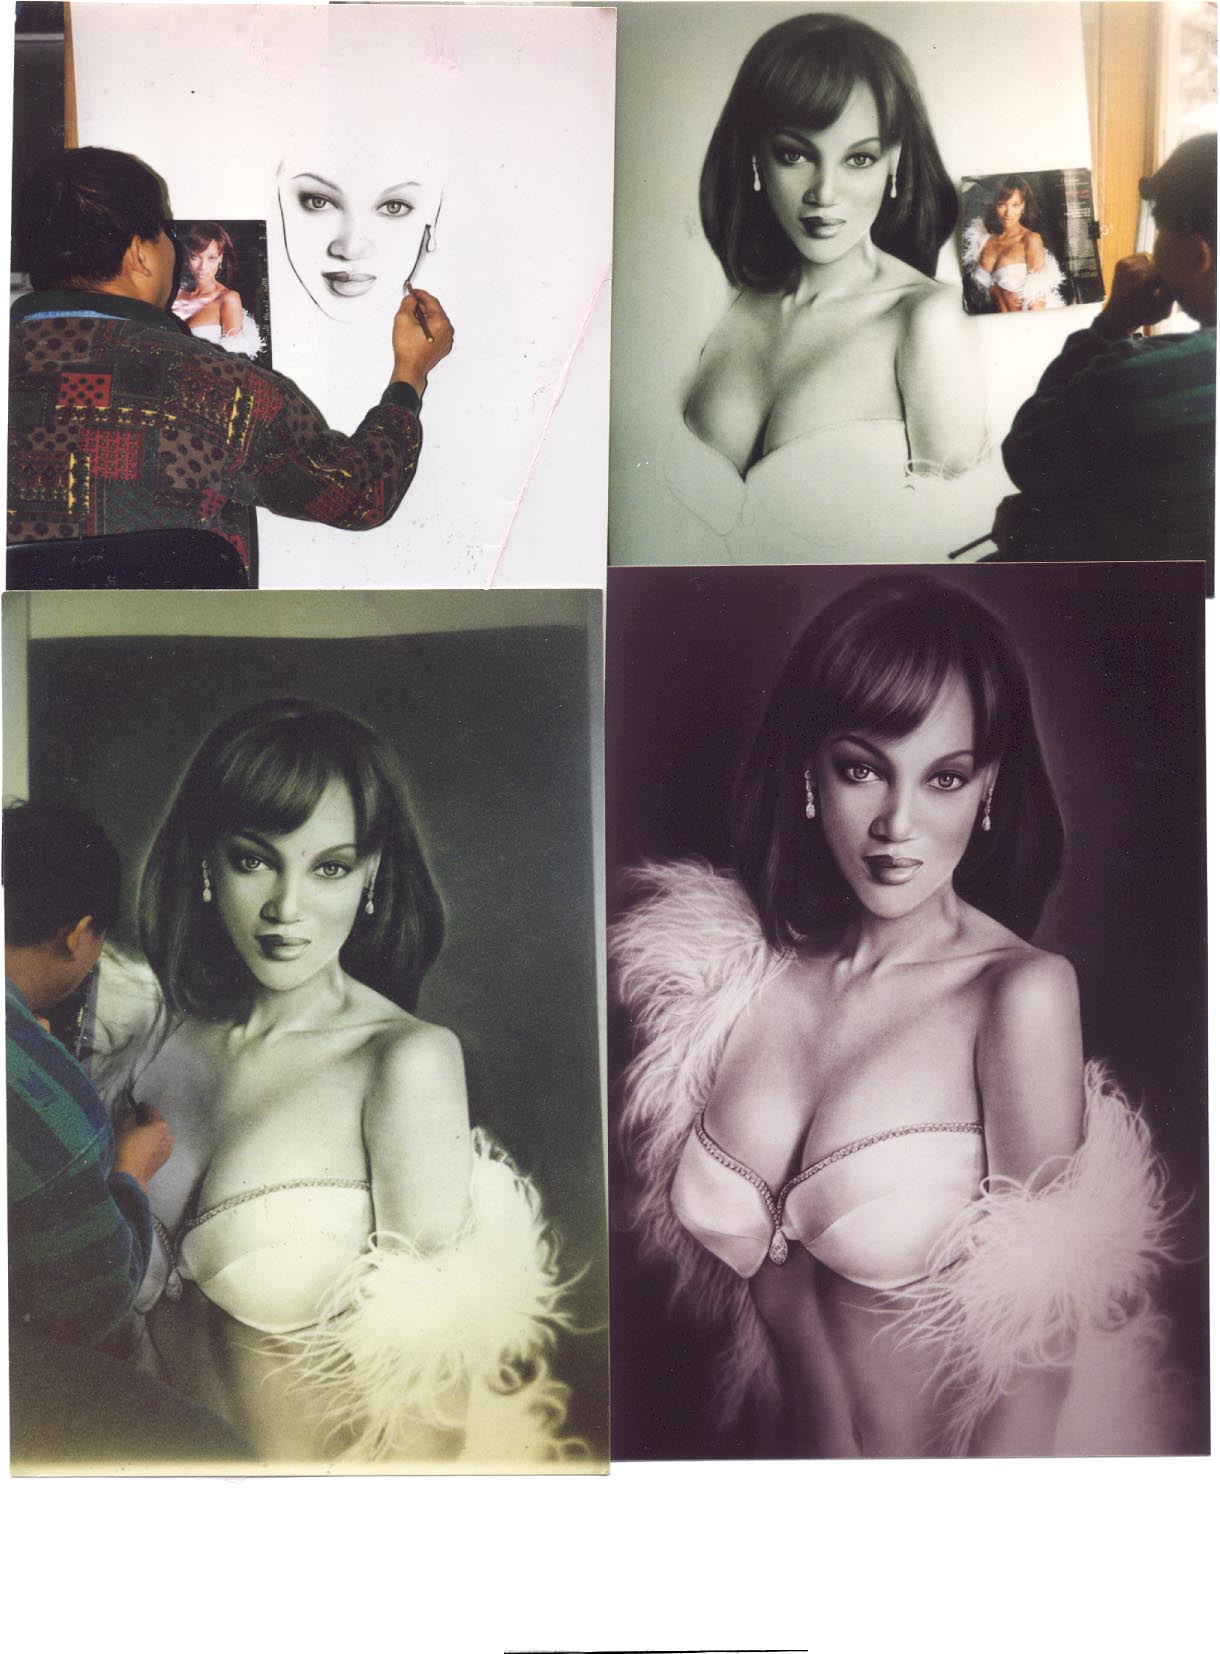 These are 4 pictures of Tyra Banks.